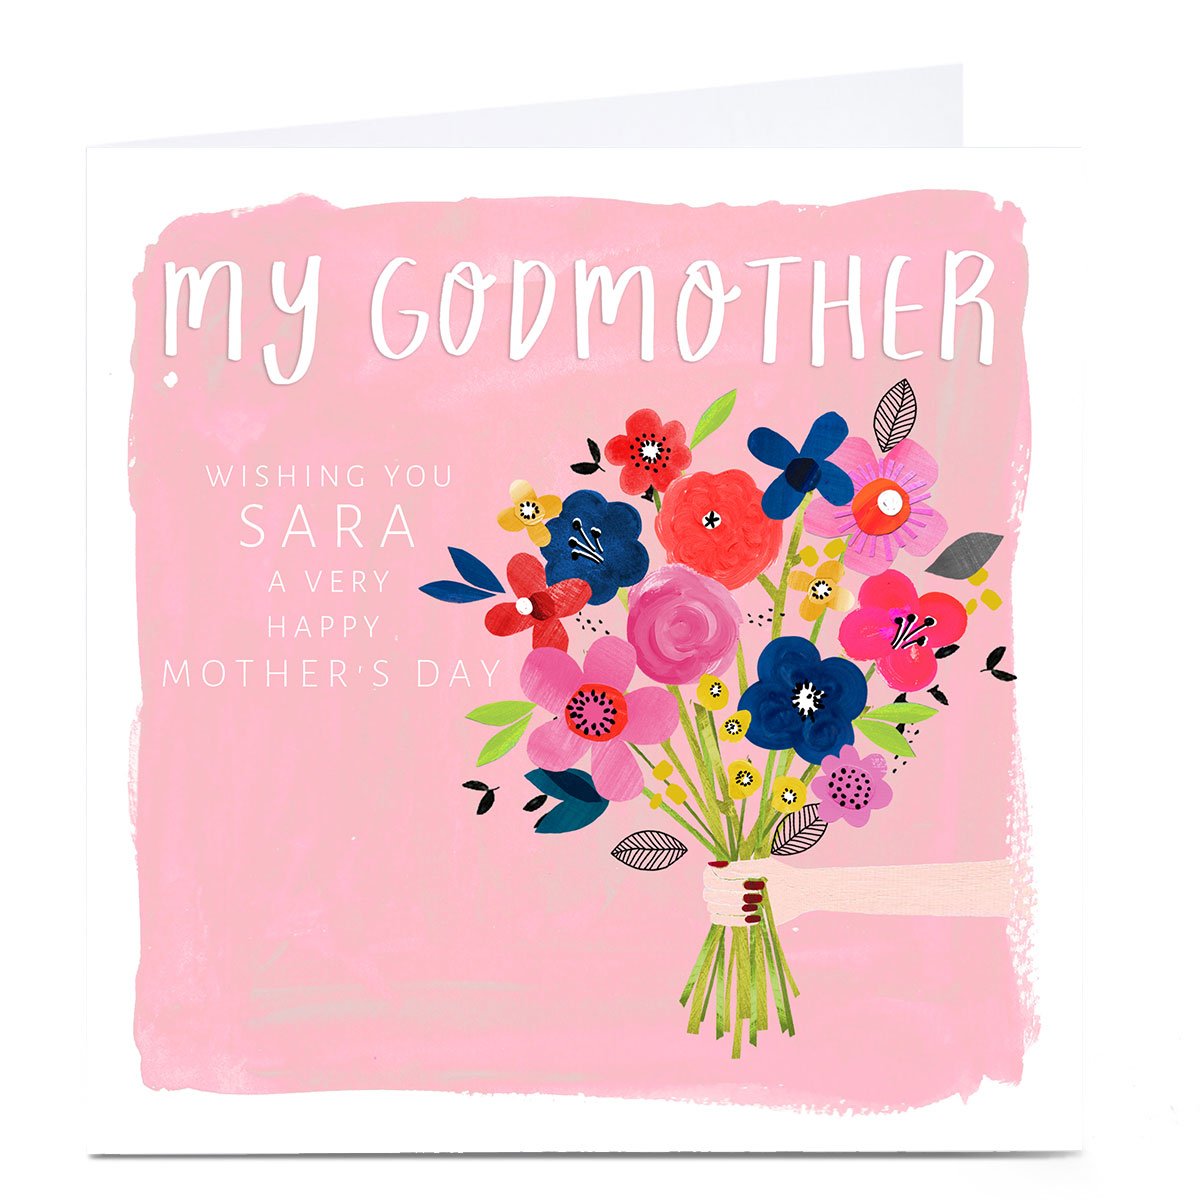 Personalised Kerry Spurling Mother's Day Card - My Godmother Flowers